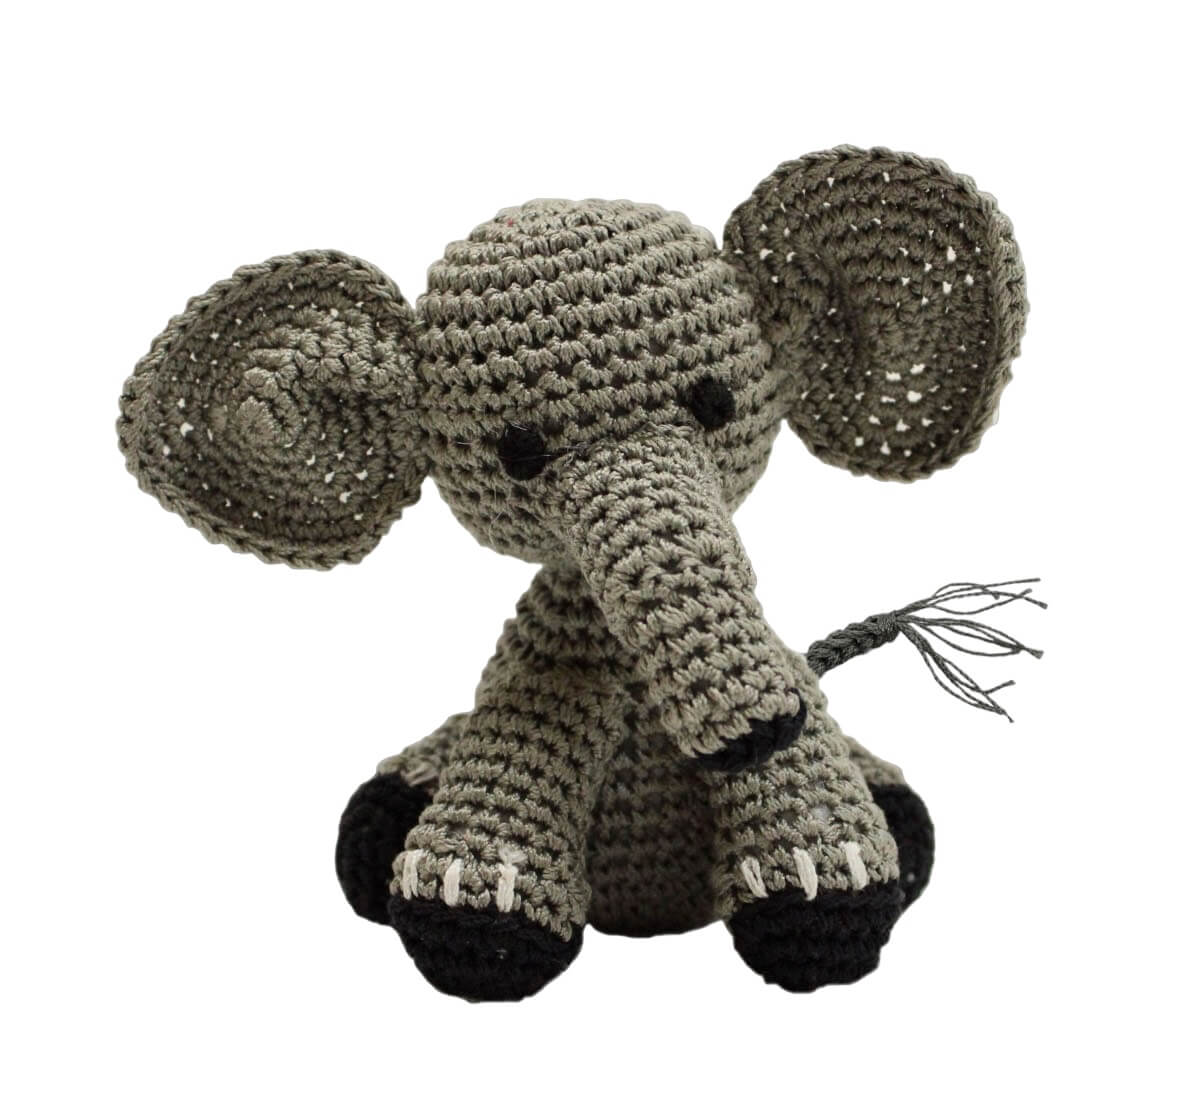 Knit Knacks "Bubbles the Baby Elephant" handmade organic cotton dog toy.  Gray elephant with big, round ears, a trunk, and a fringed tail.